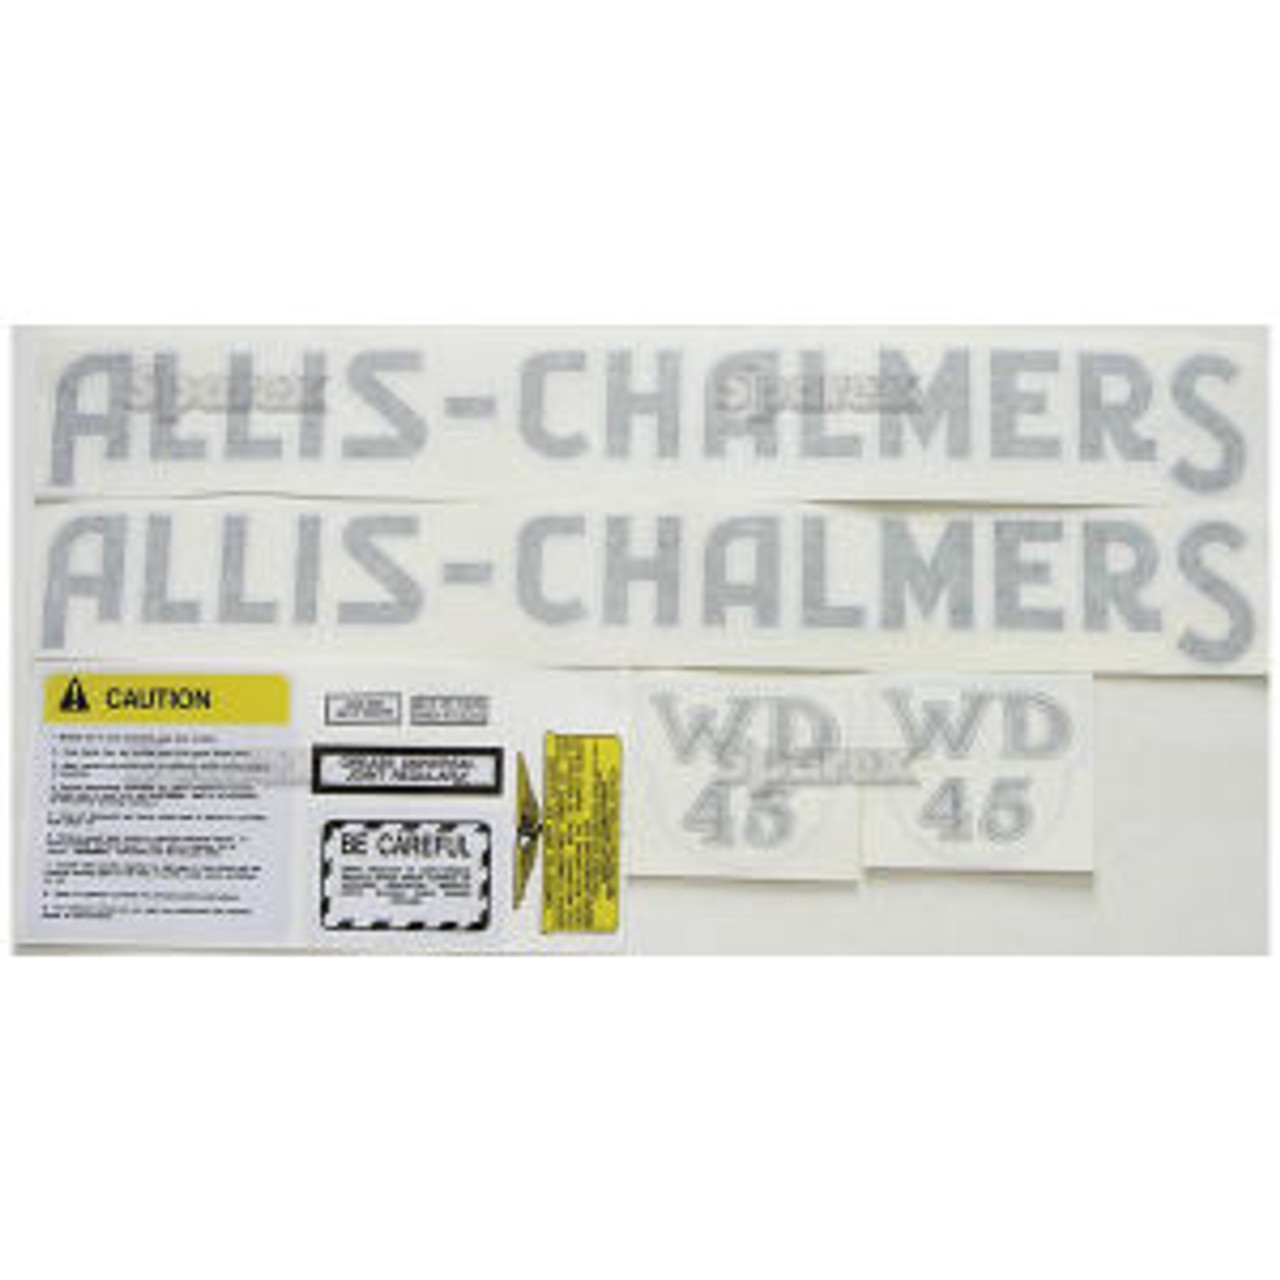 New Allis Chalmers WD45 Complete Decal Set (Black Letters)